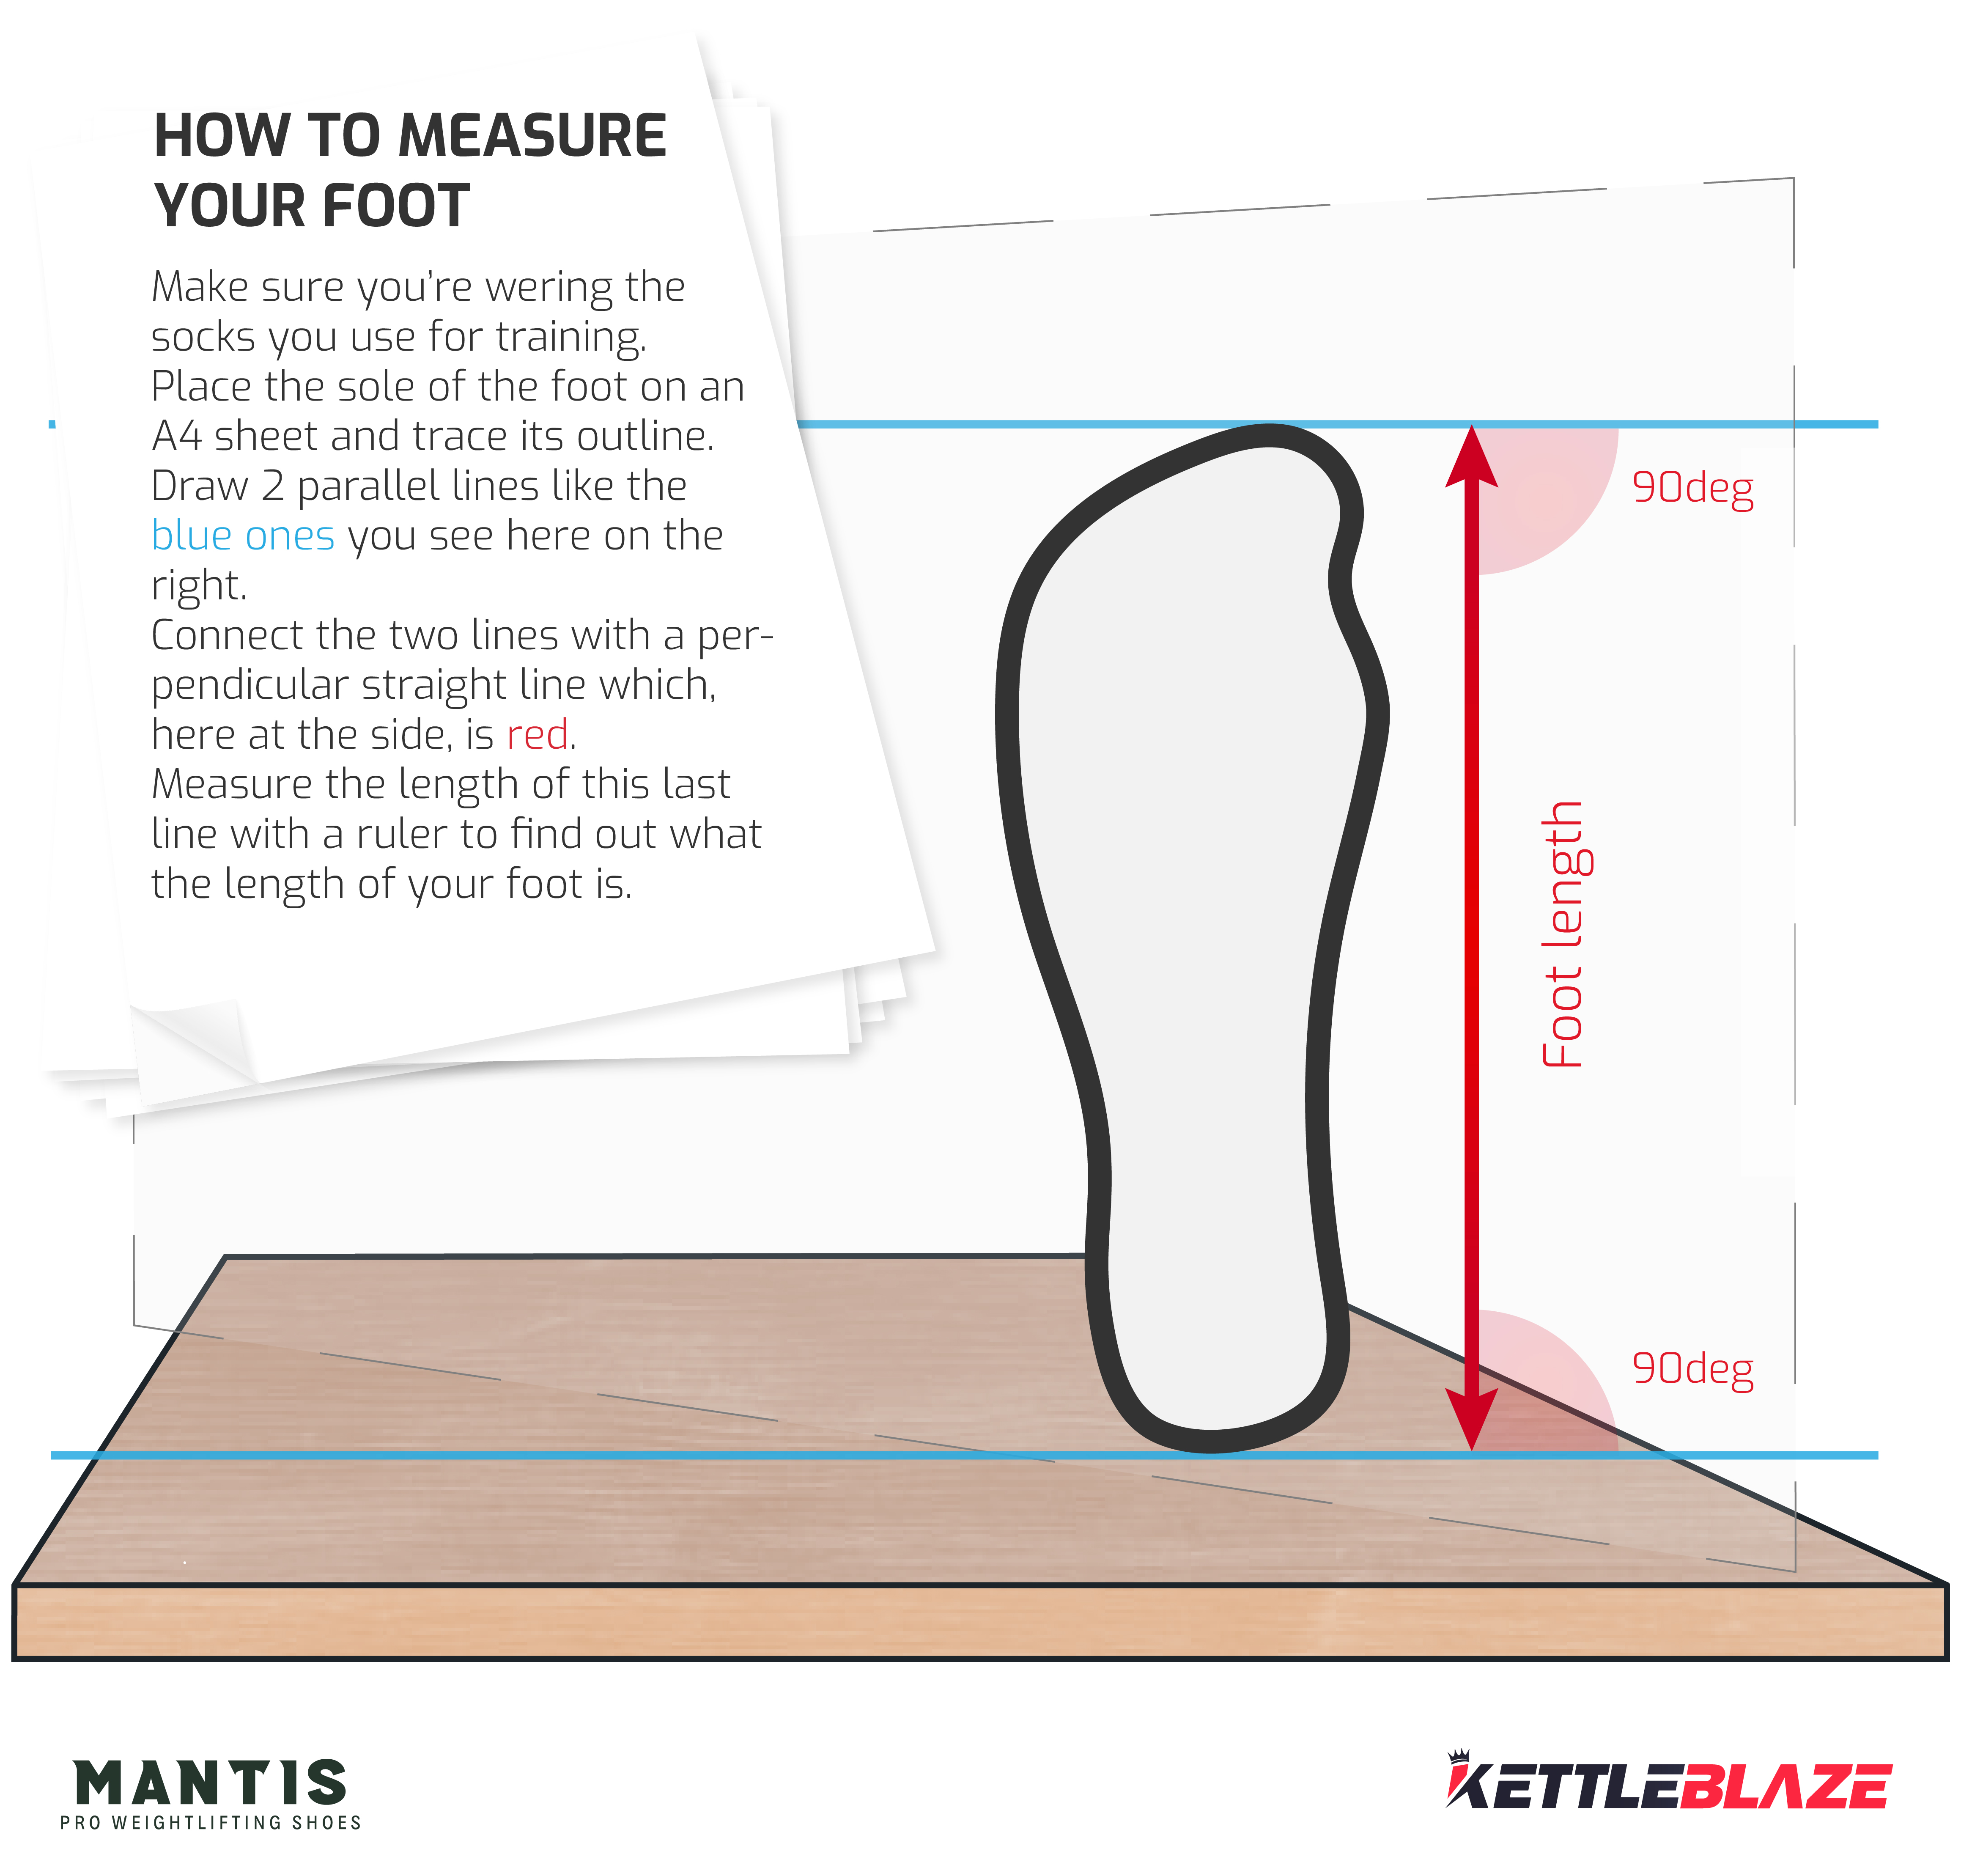 How to measure the lenght of your foot - Mantis shoes for kettlebell sport